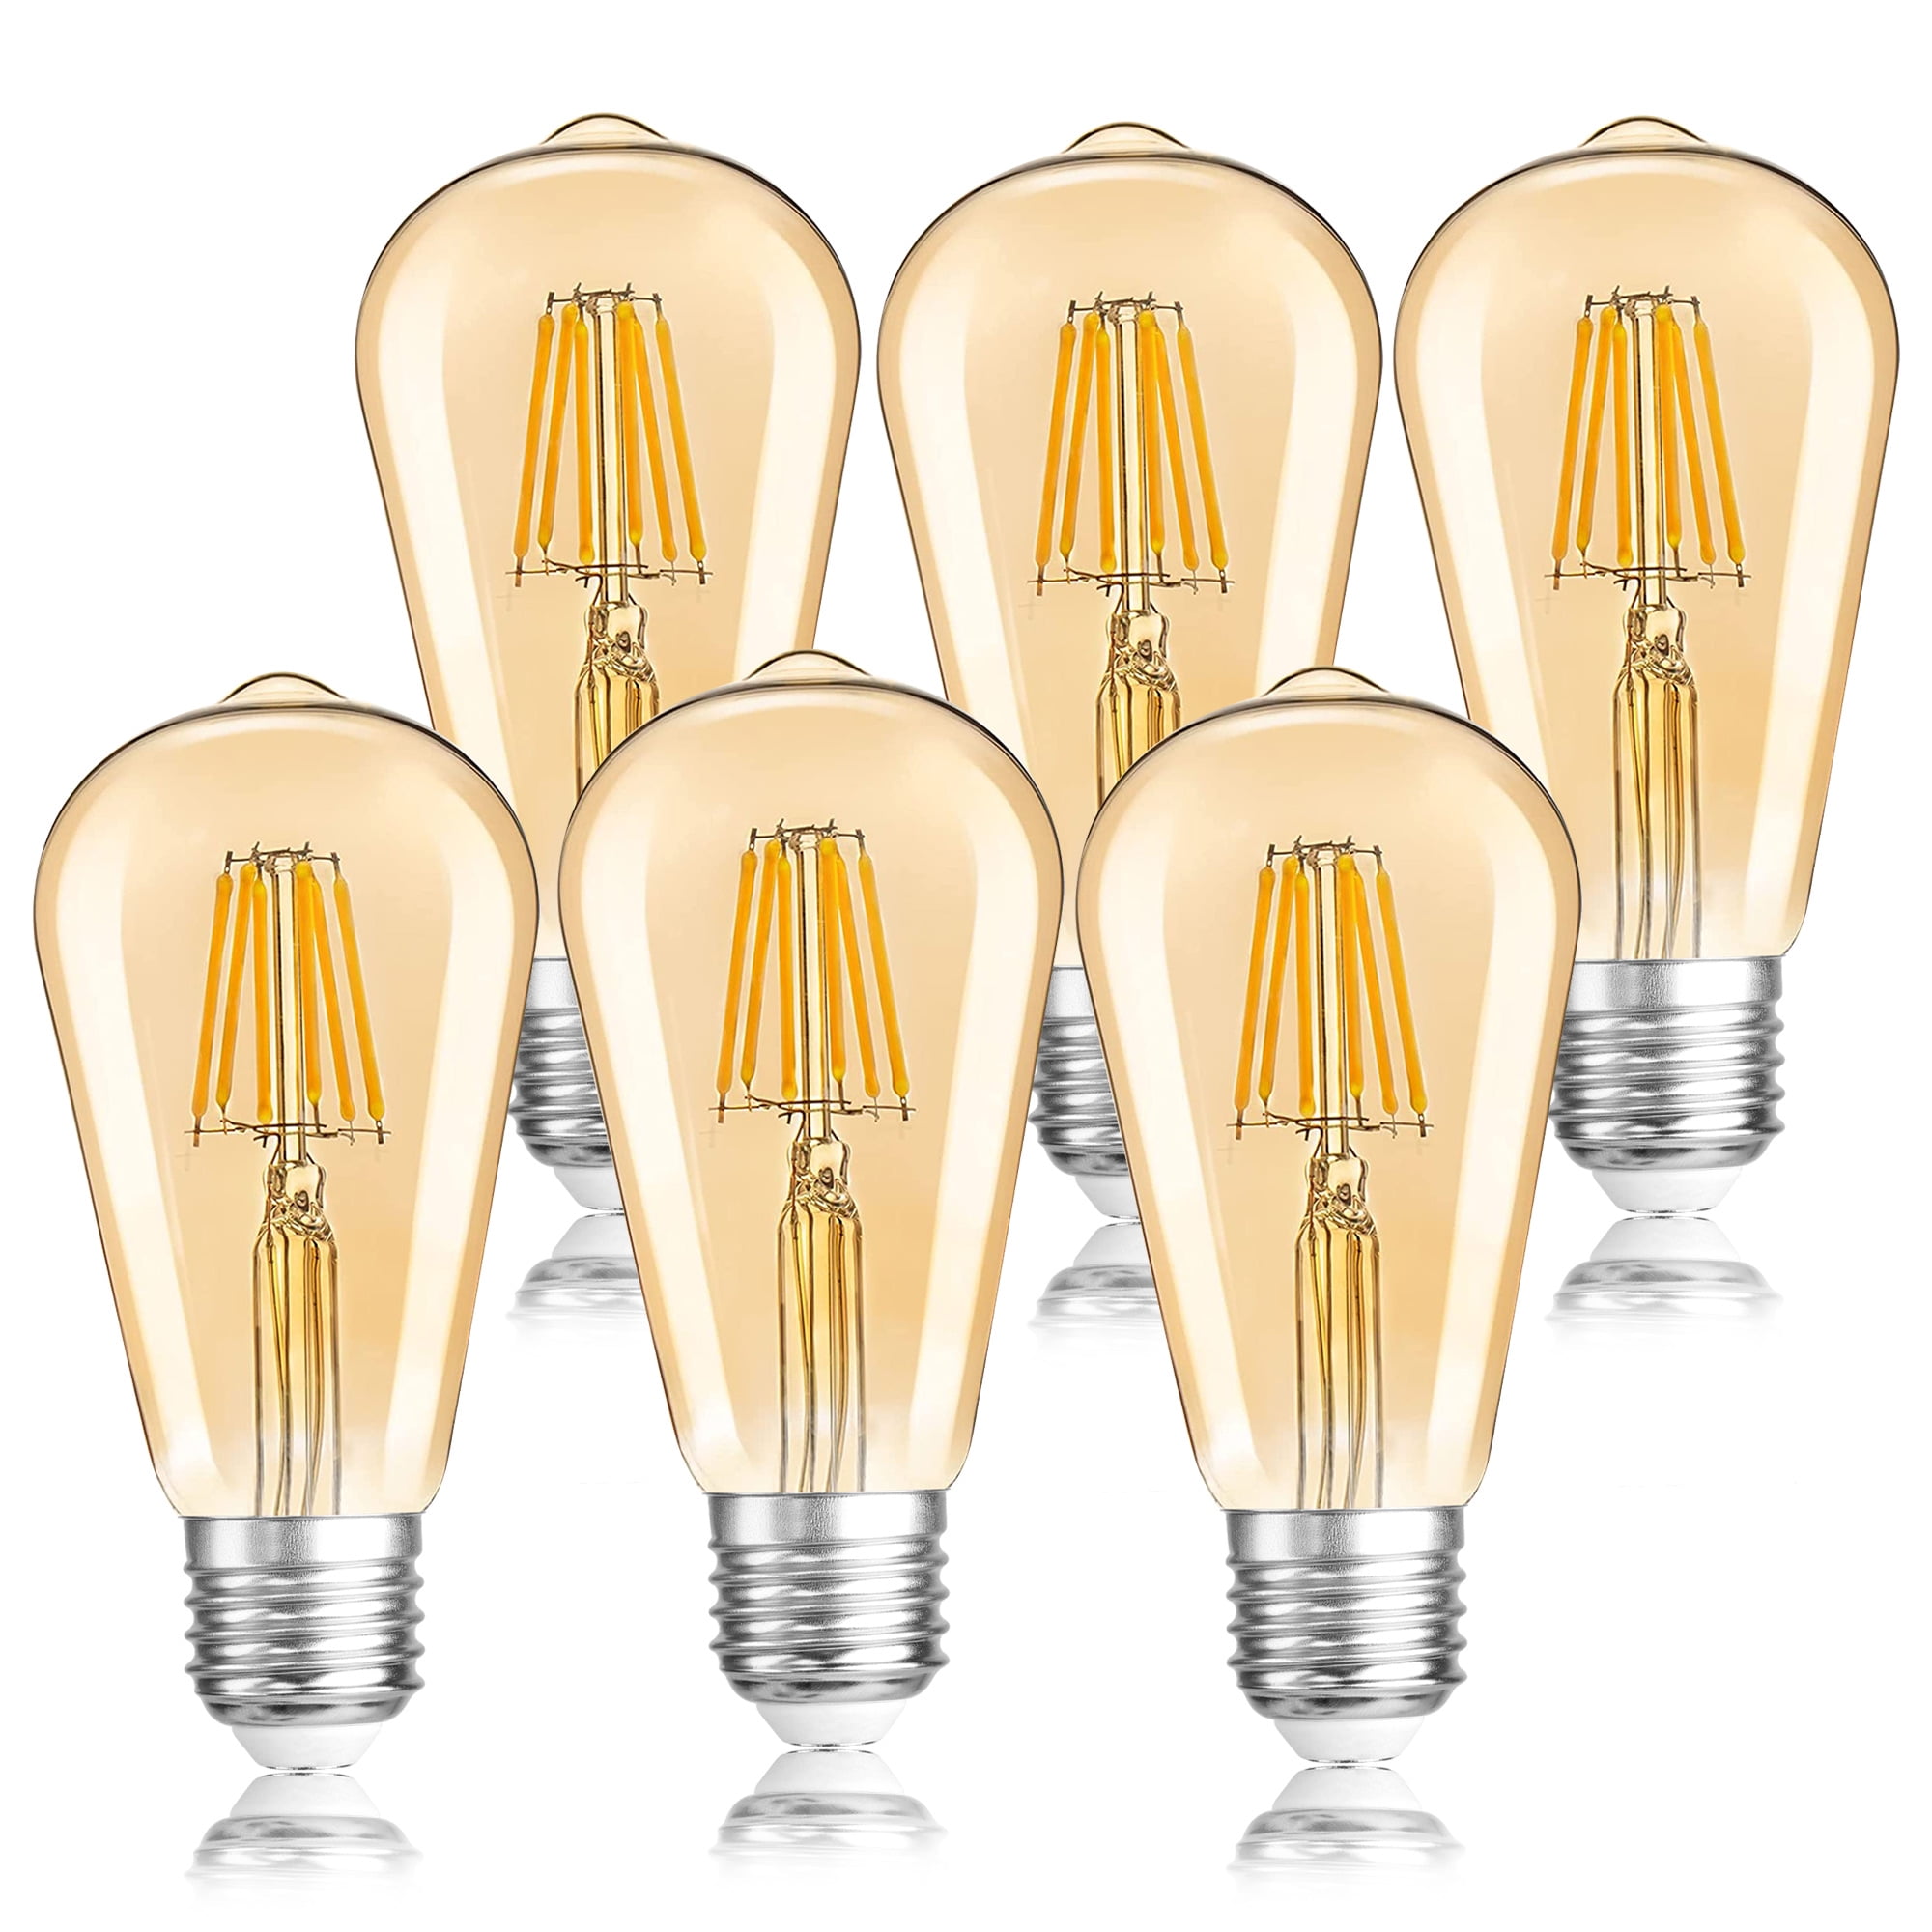 Ampoule Led E27 Dimmable, 6W Ampoules Led Dimmable=60W